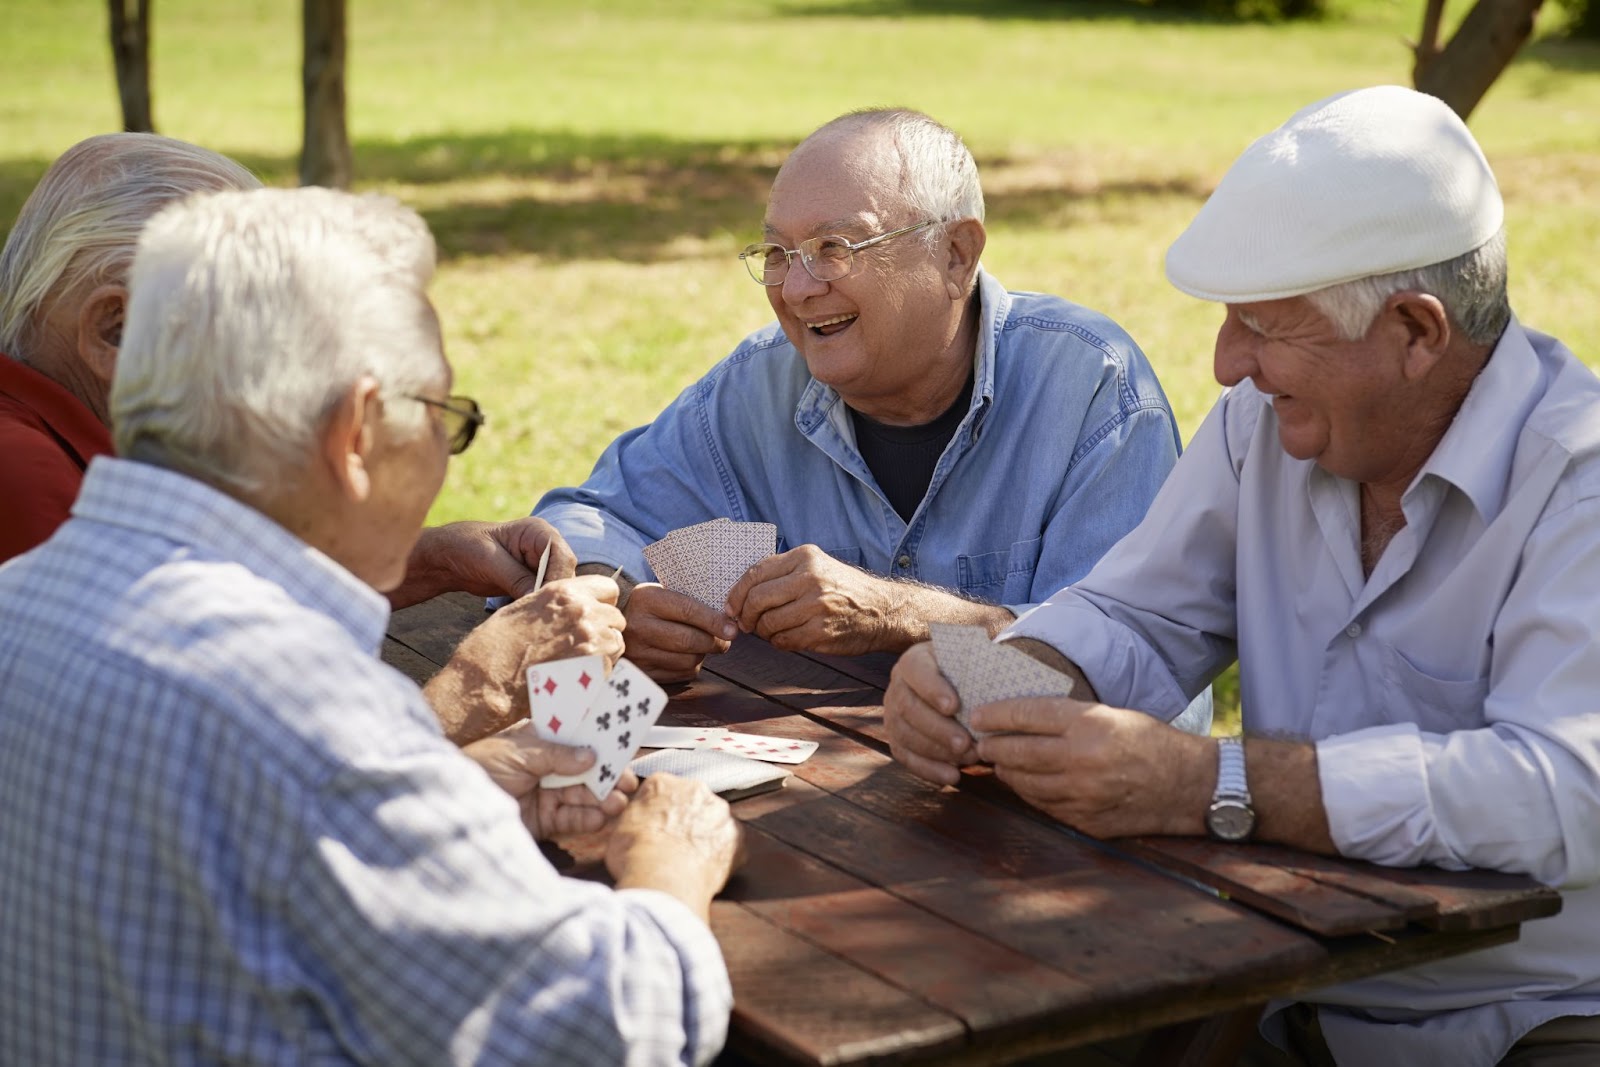 Group of four elderly men having fun and playing cards game at the park.